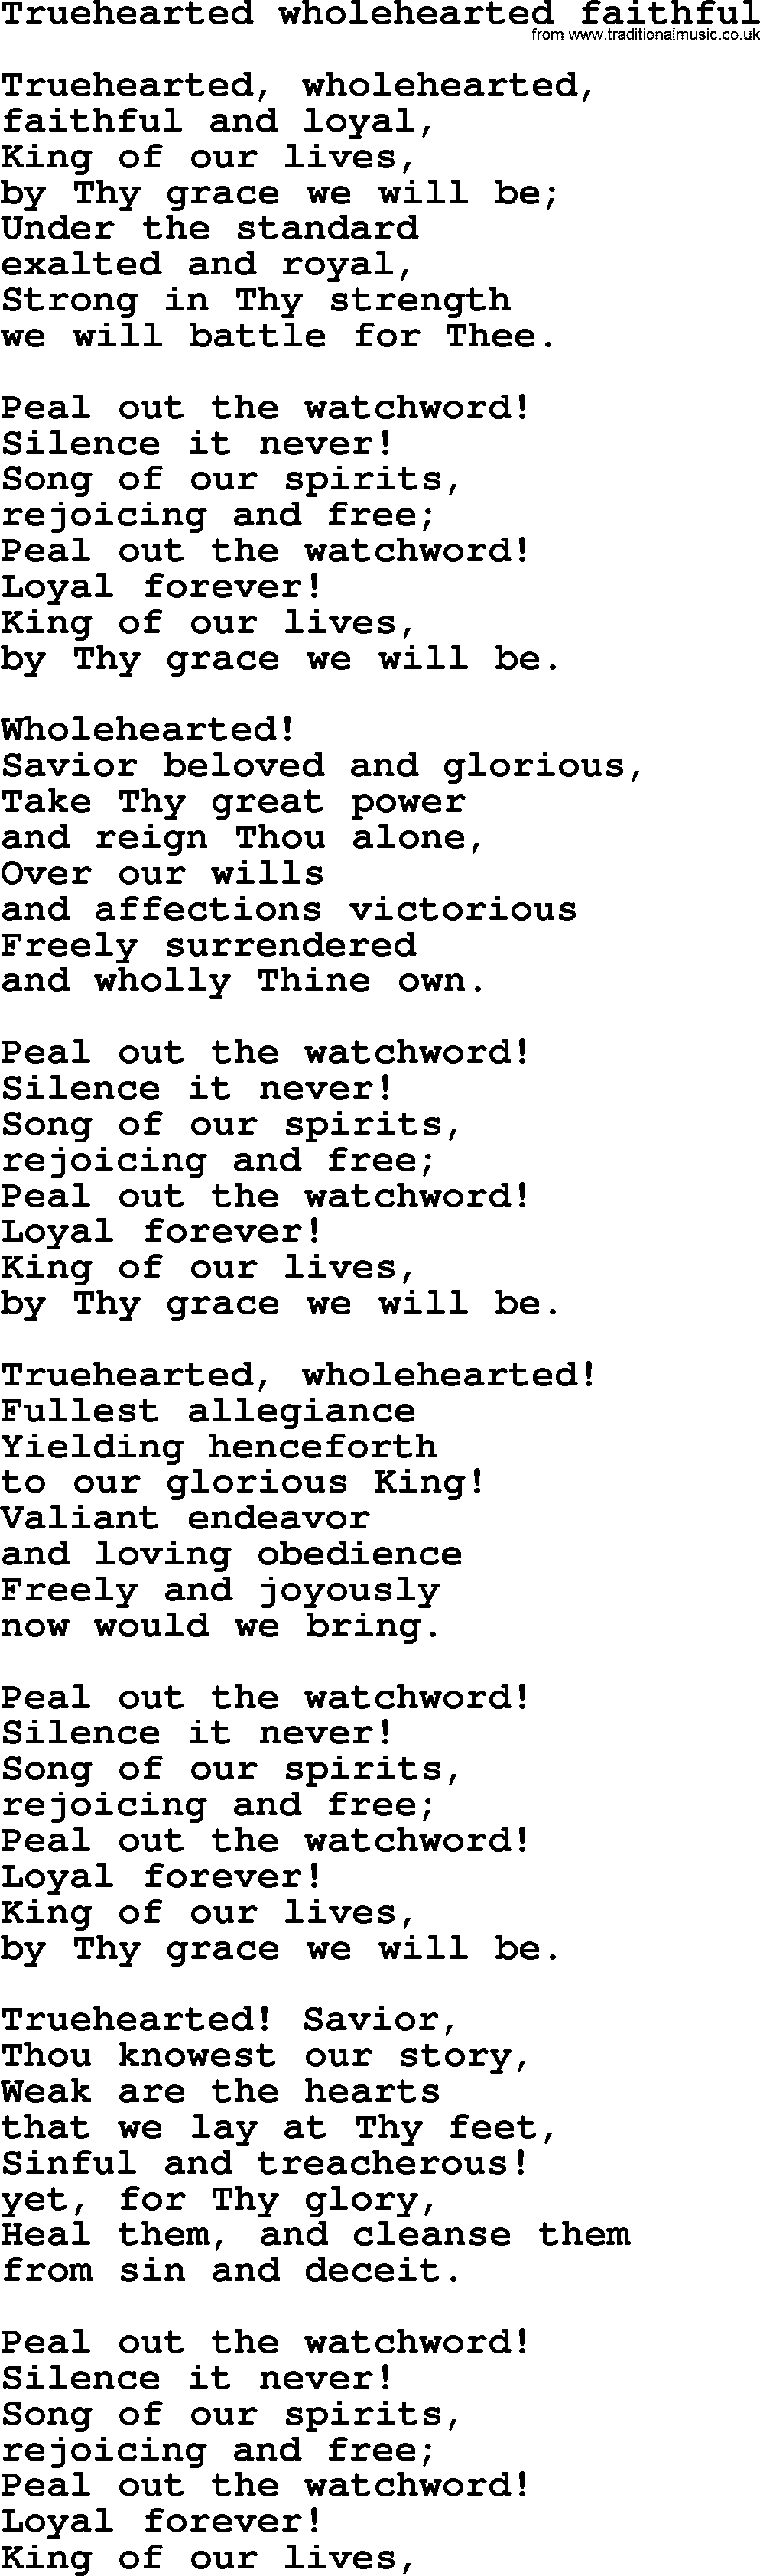 Sacred Songs and Solos complete, 1200 Hymns, title: Truehearted Wholehearted Faithful, lyrics and PDF